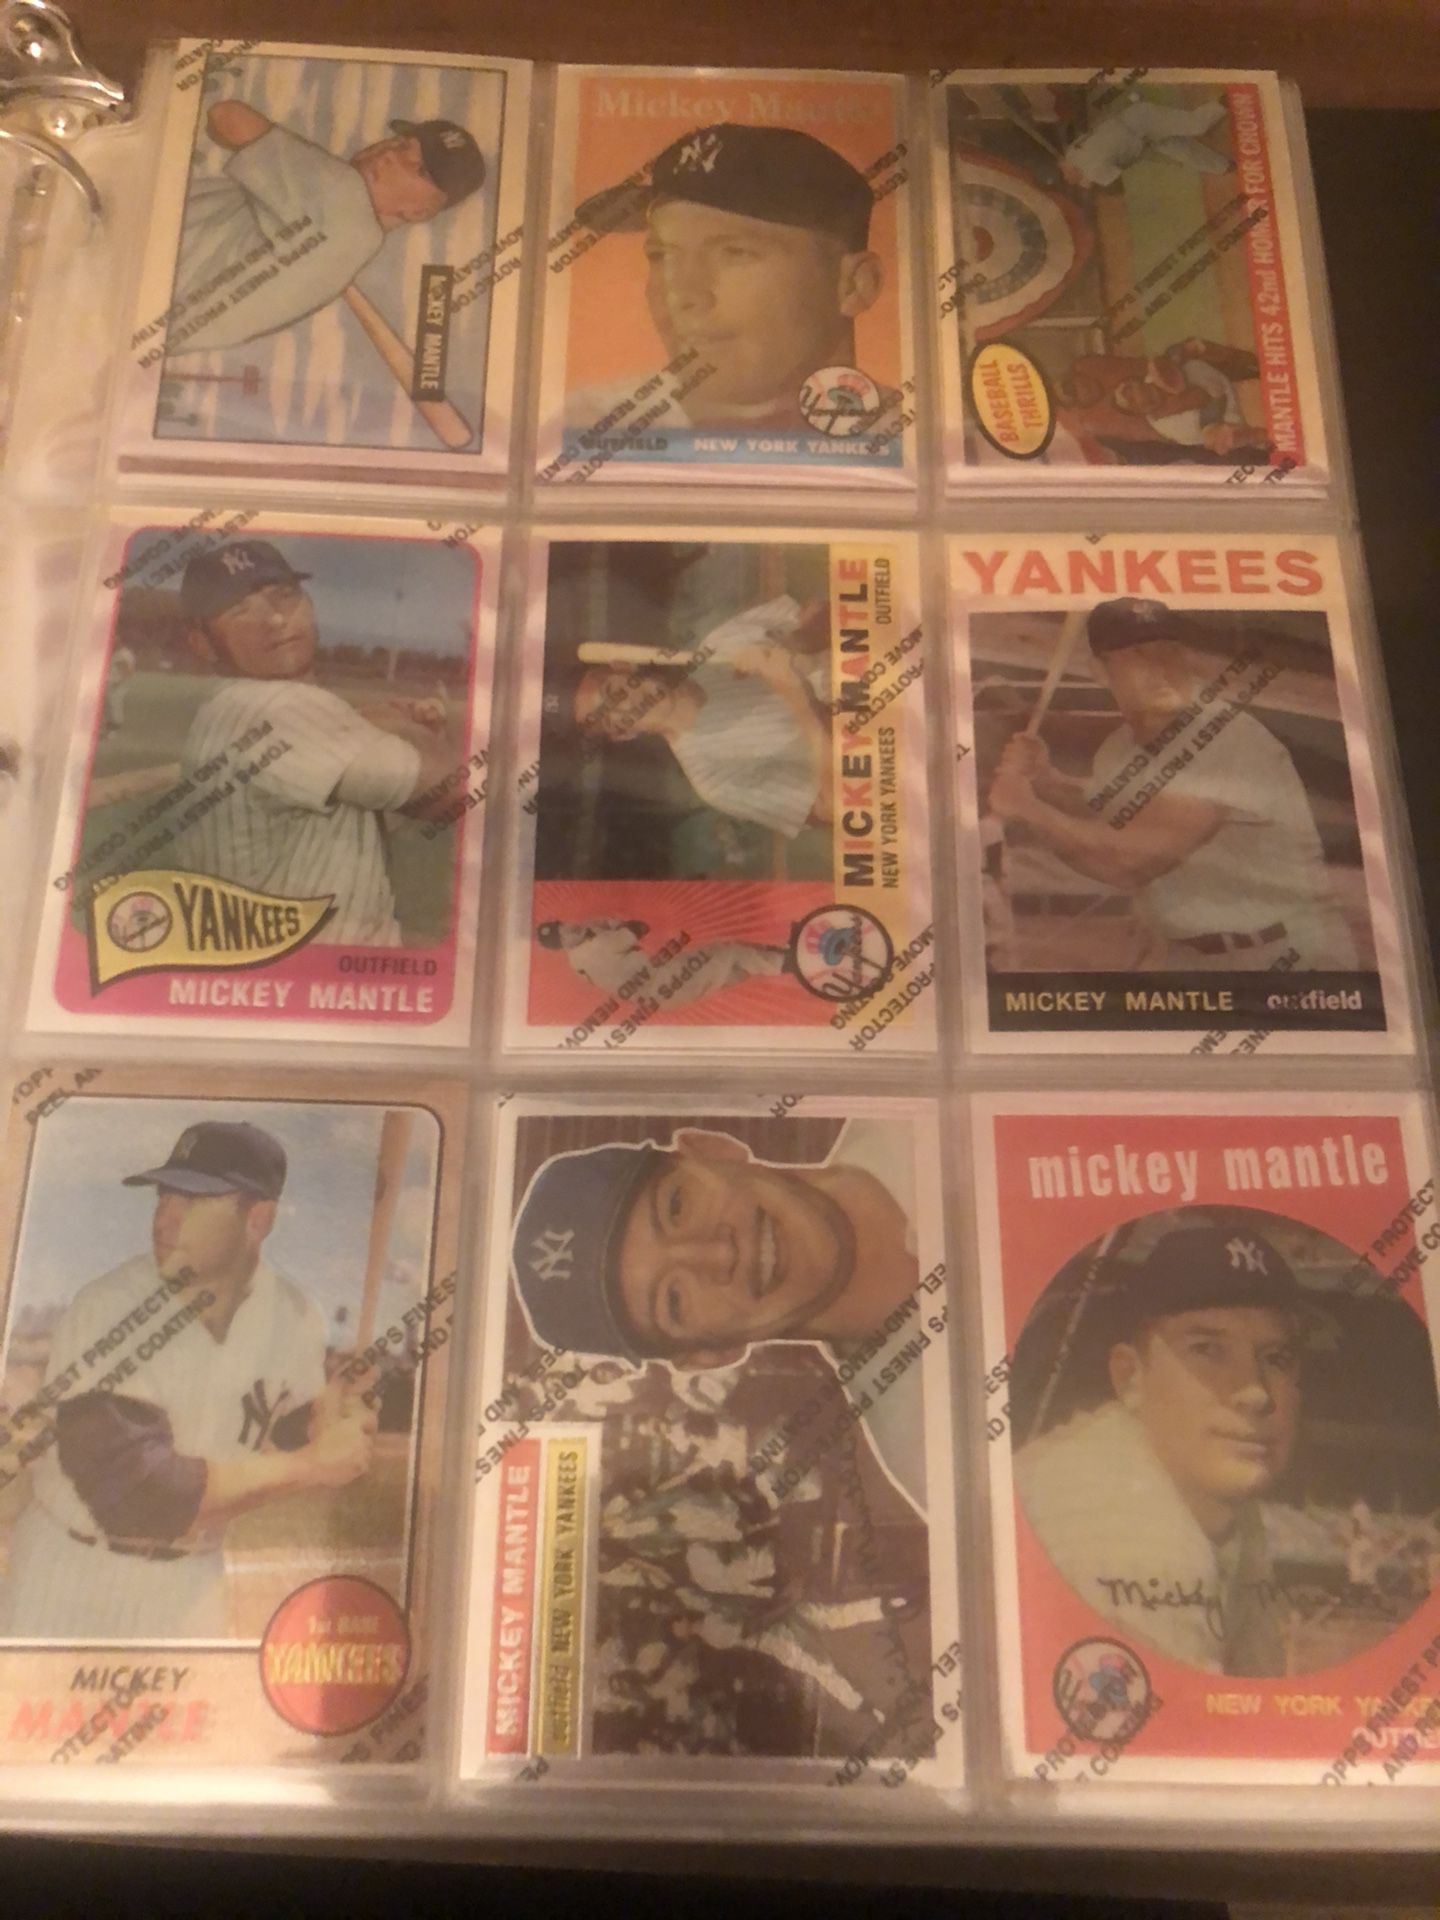 Check page for old baseball cards